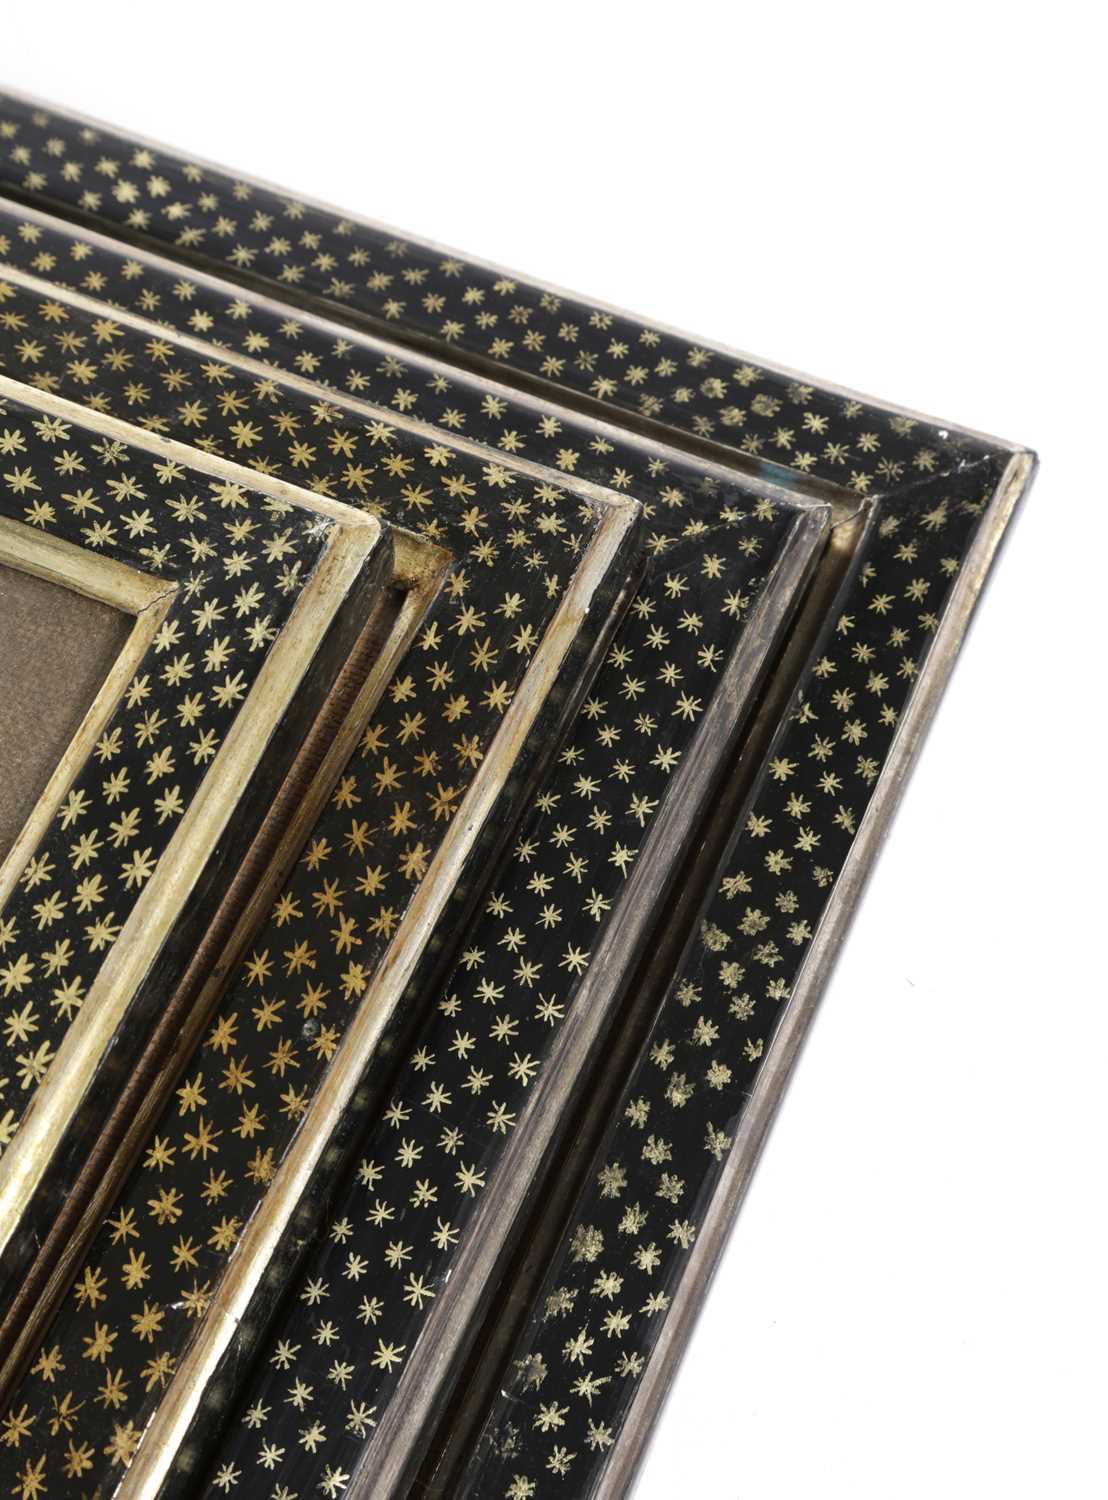 A SET OF FOUR PAINTED EBONISED AND GILT PICTURE FRAMES BY COLEFAX & FOWLER, IN REGENCY STYLE, C.